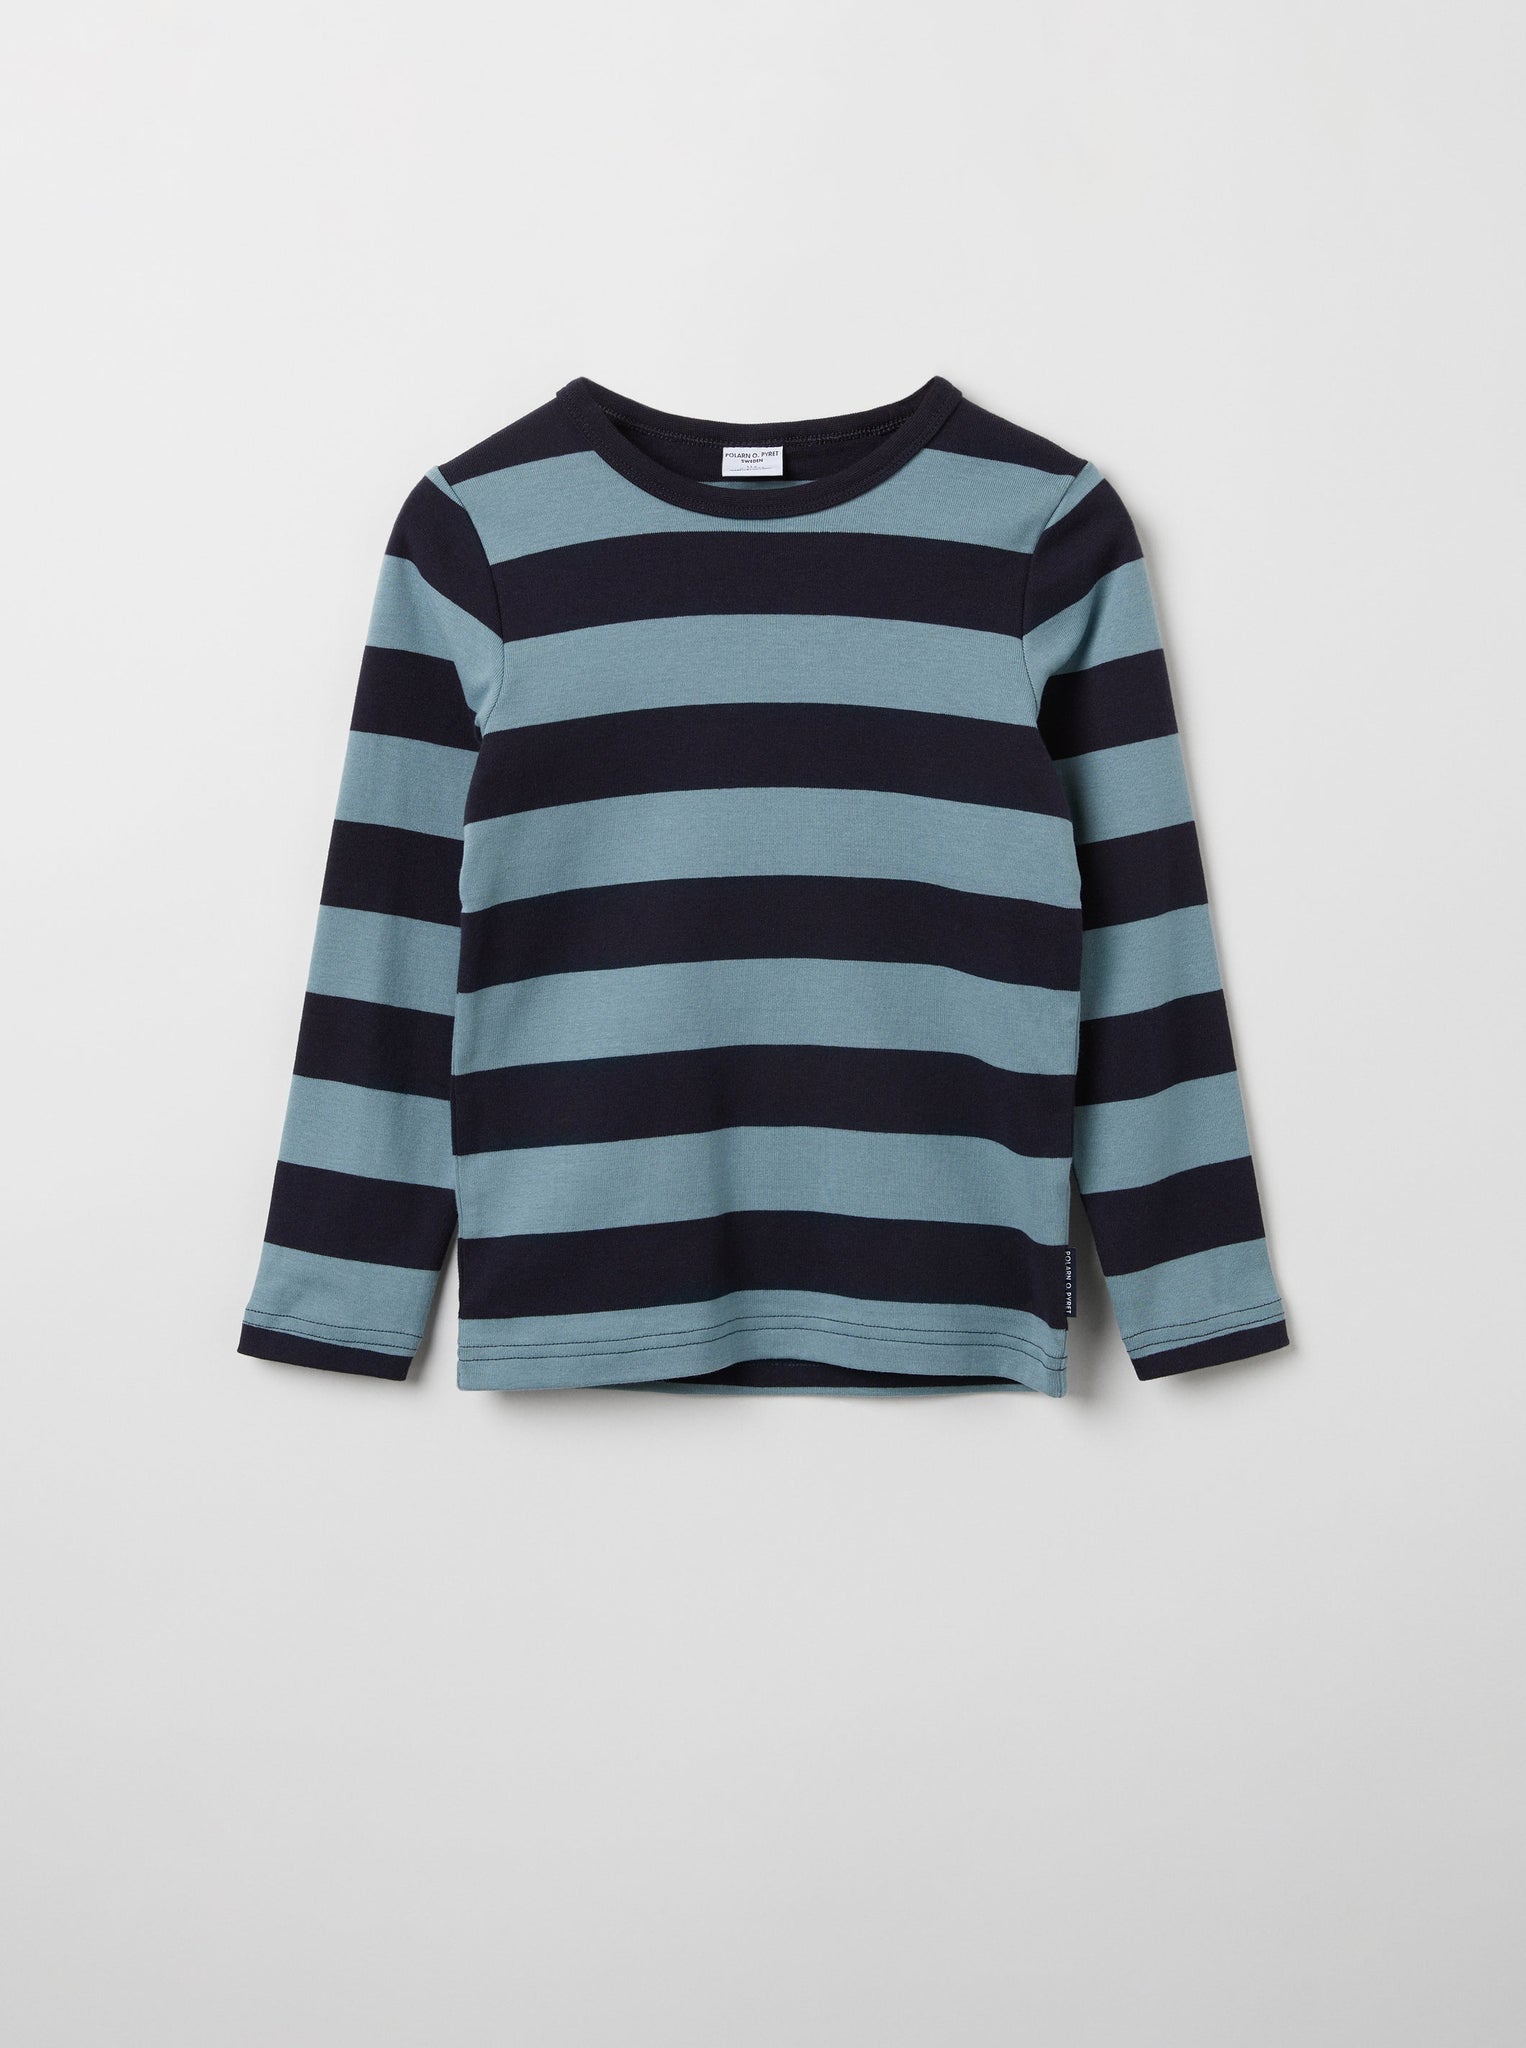 Striped Organic Cotton Blue Kids Top from the Polarn O. Pyret kidswear collection. Ethically produced kids clothing.